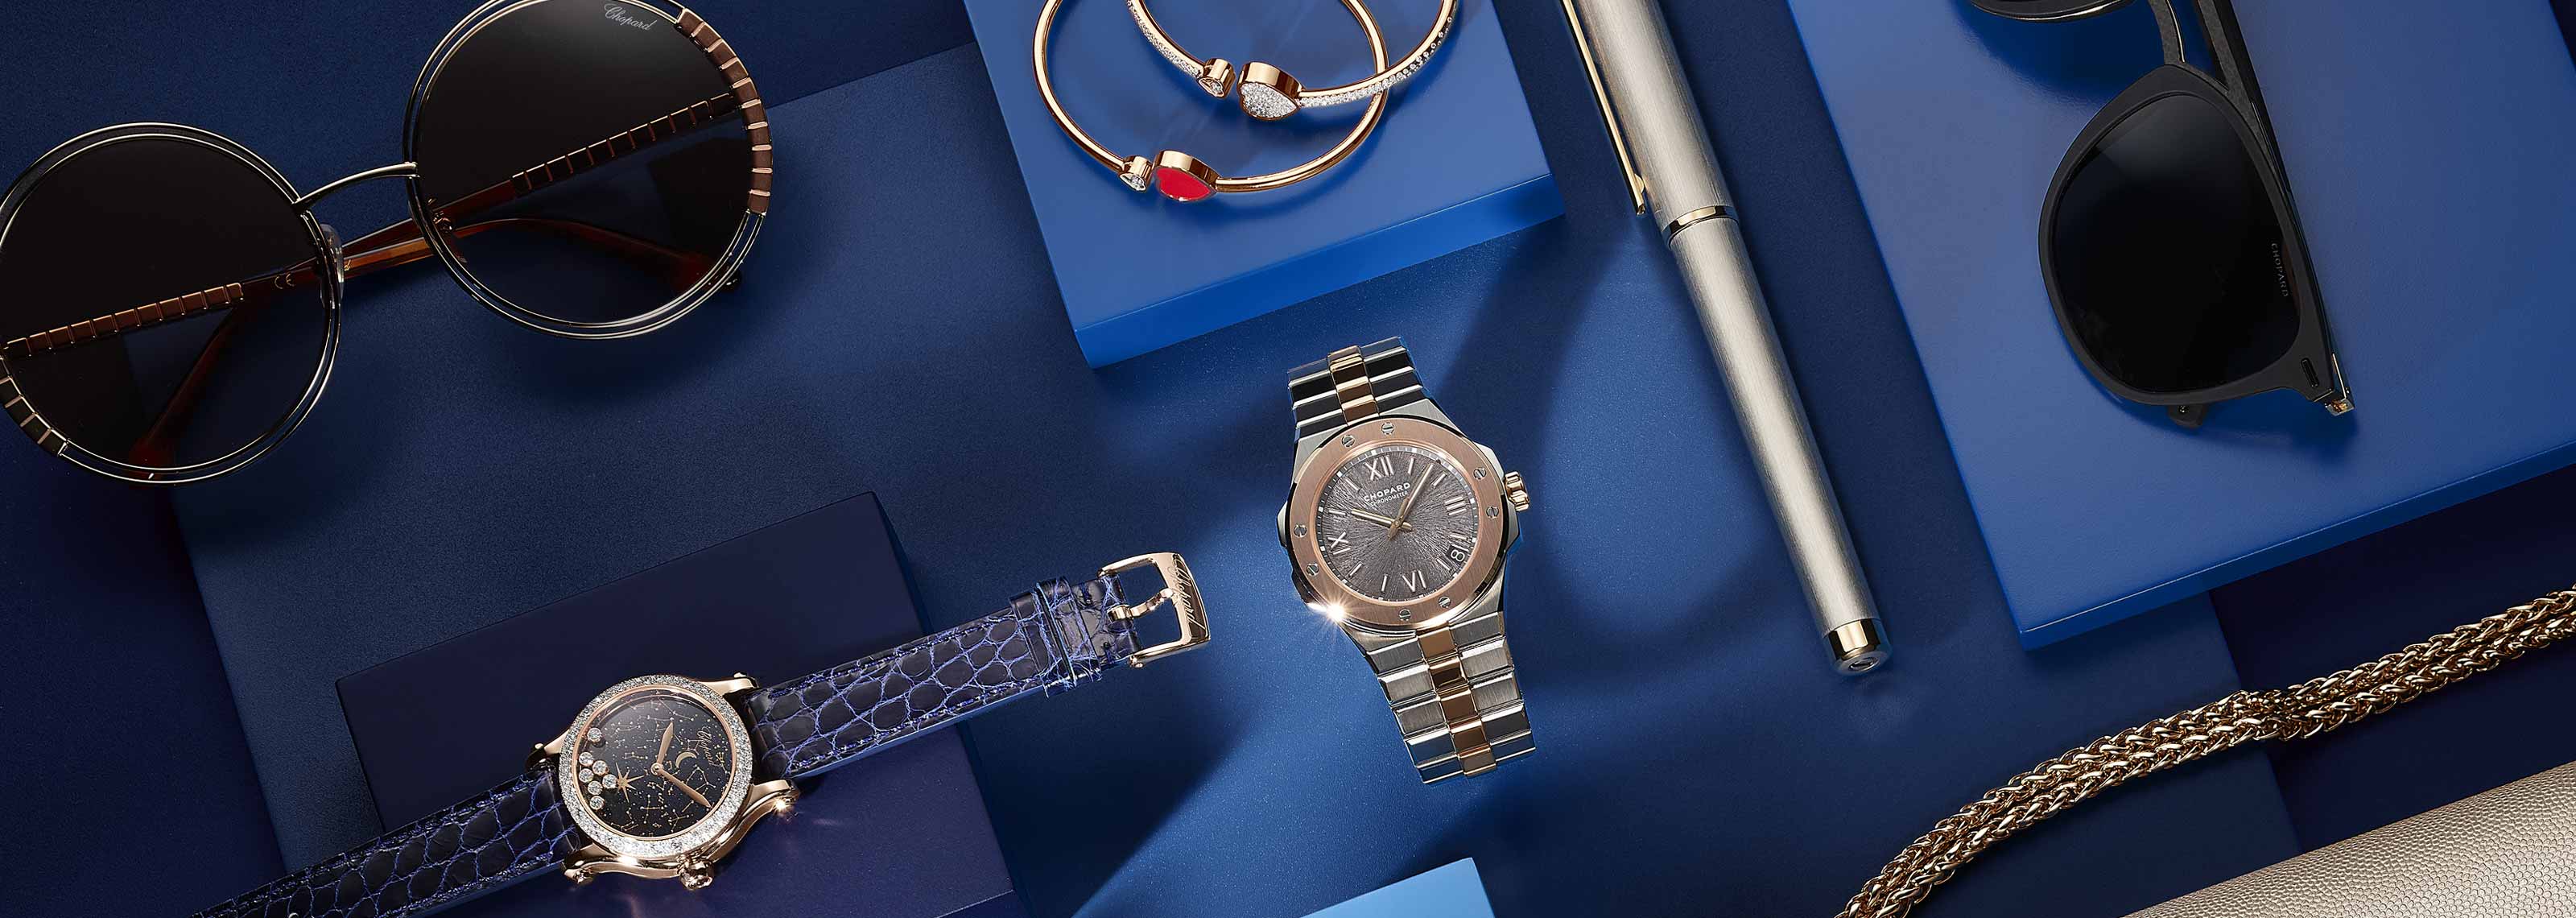 https://www.manfredijewels.com/collections/chopard-watches